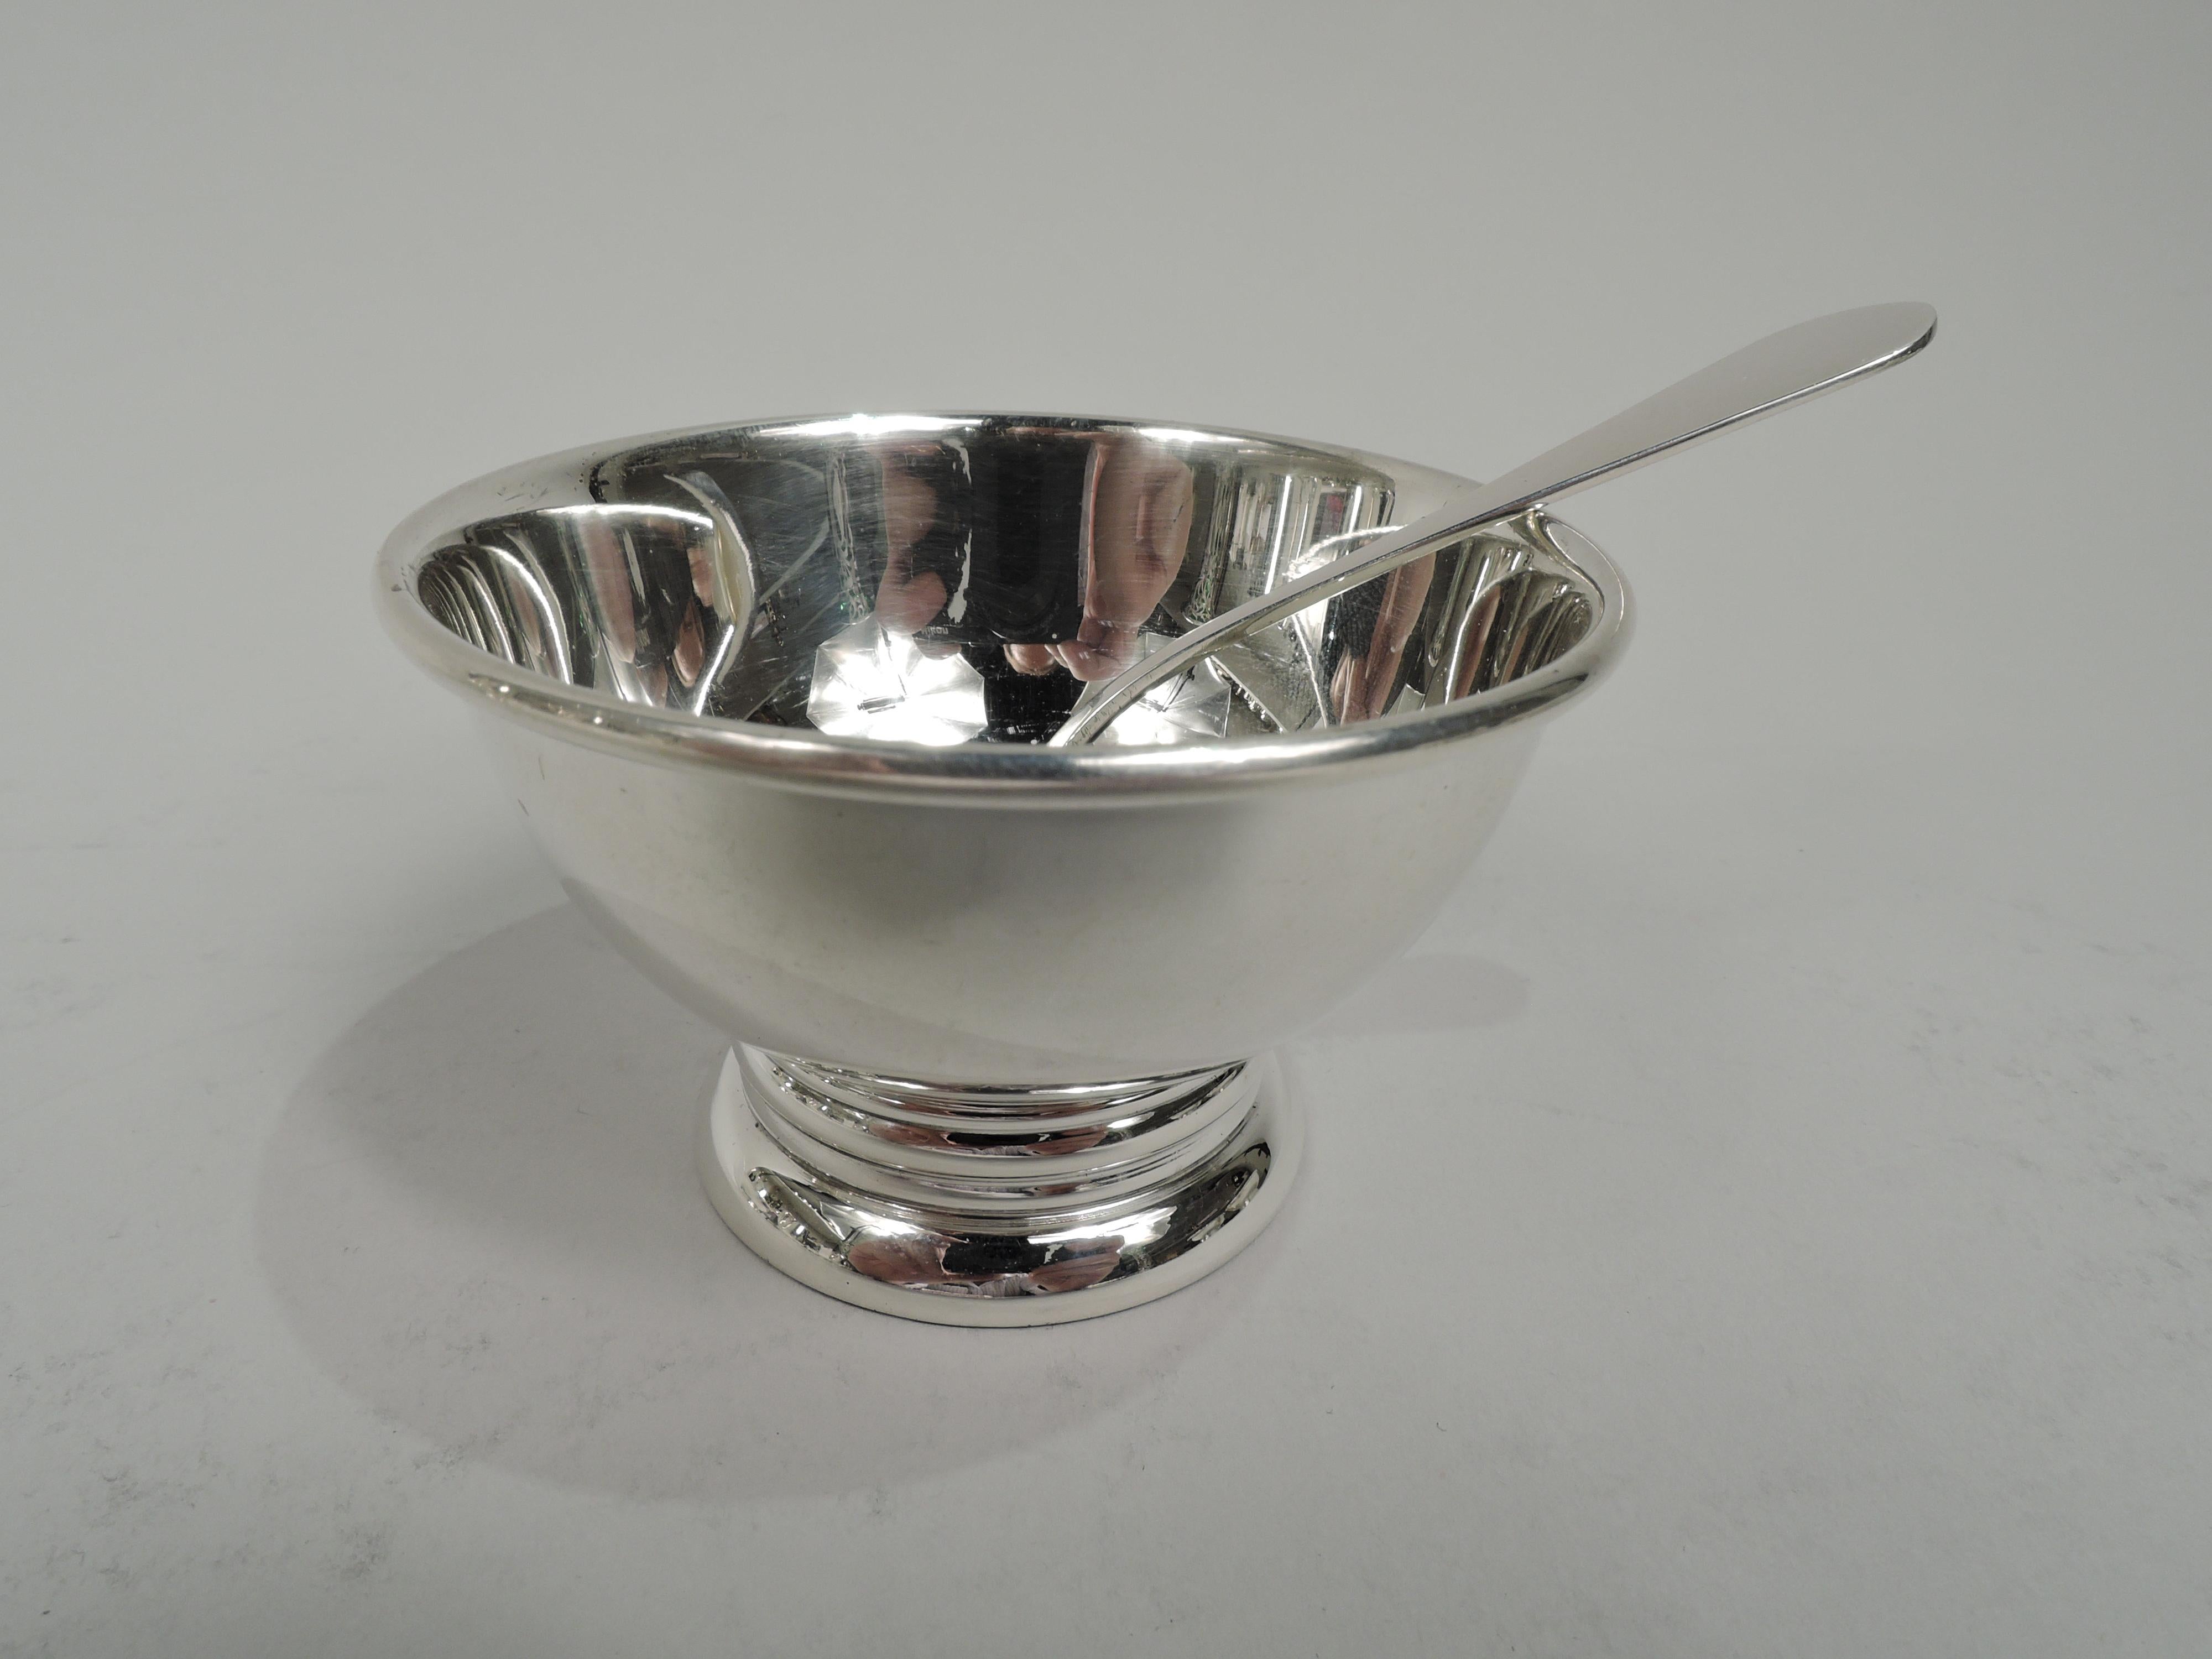 Set of 4 Royal Danish sterling silver open salts. Made by International Silver Co. in Meriden, Conn. Each: Round bowl with molded rim and lobed and raised foot. Fully marked including maker’s stamp, and pattern name and no. S108. Dimensions: H 1 3/4